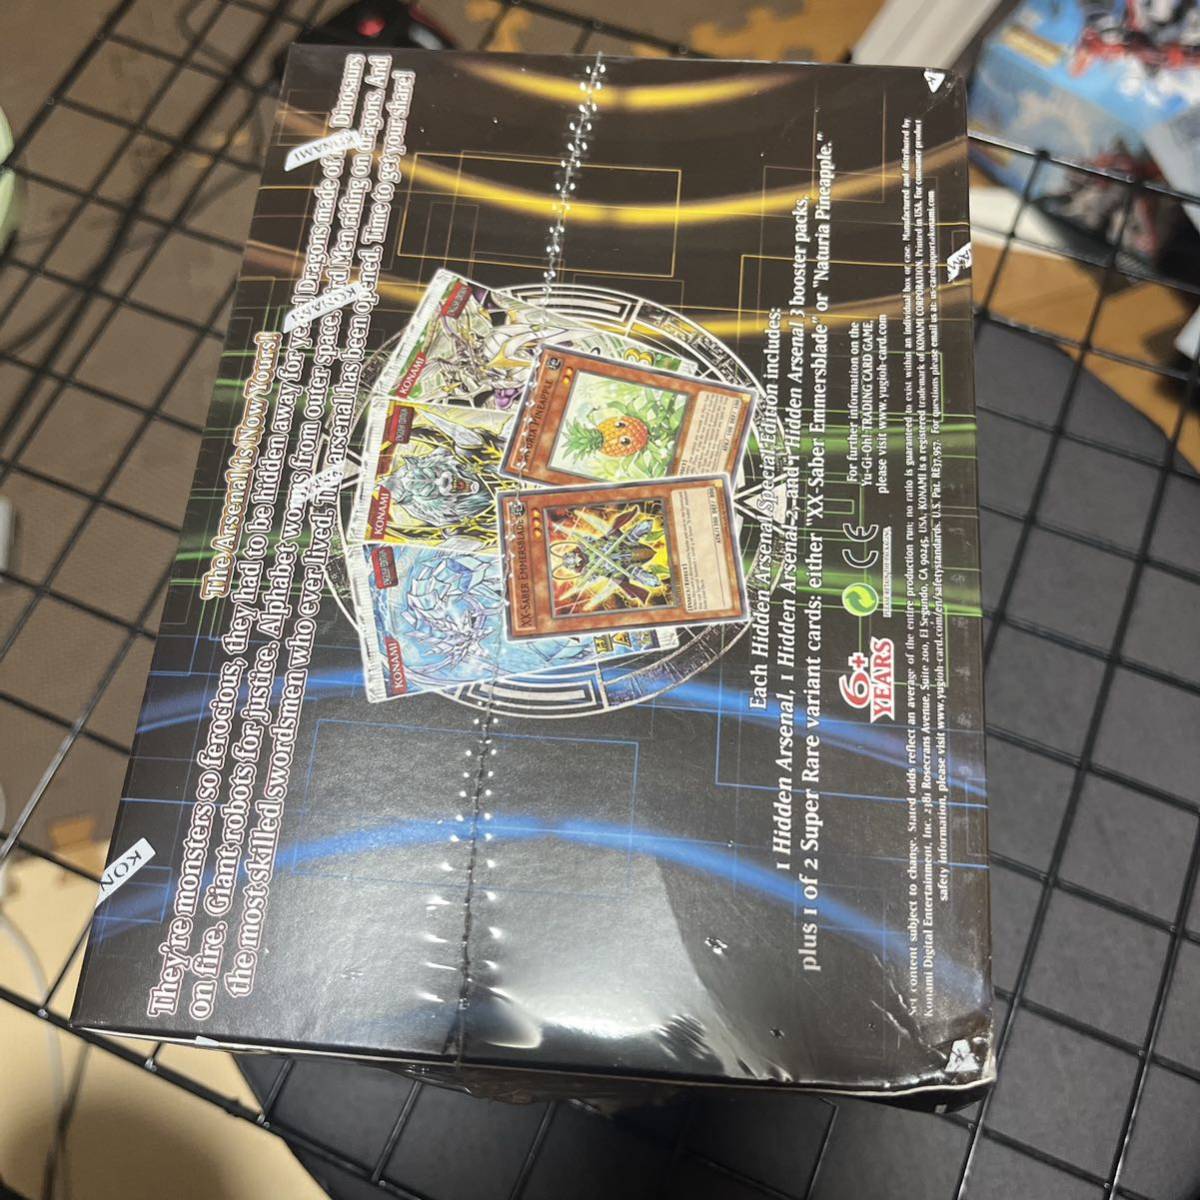  Yugioh English version hidden arsenal SE Hidden arsenal unopened box out of print 1 display Special Editiontoli shoe la ice result 